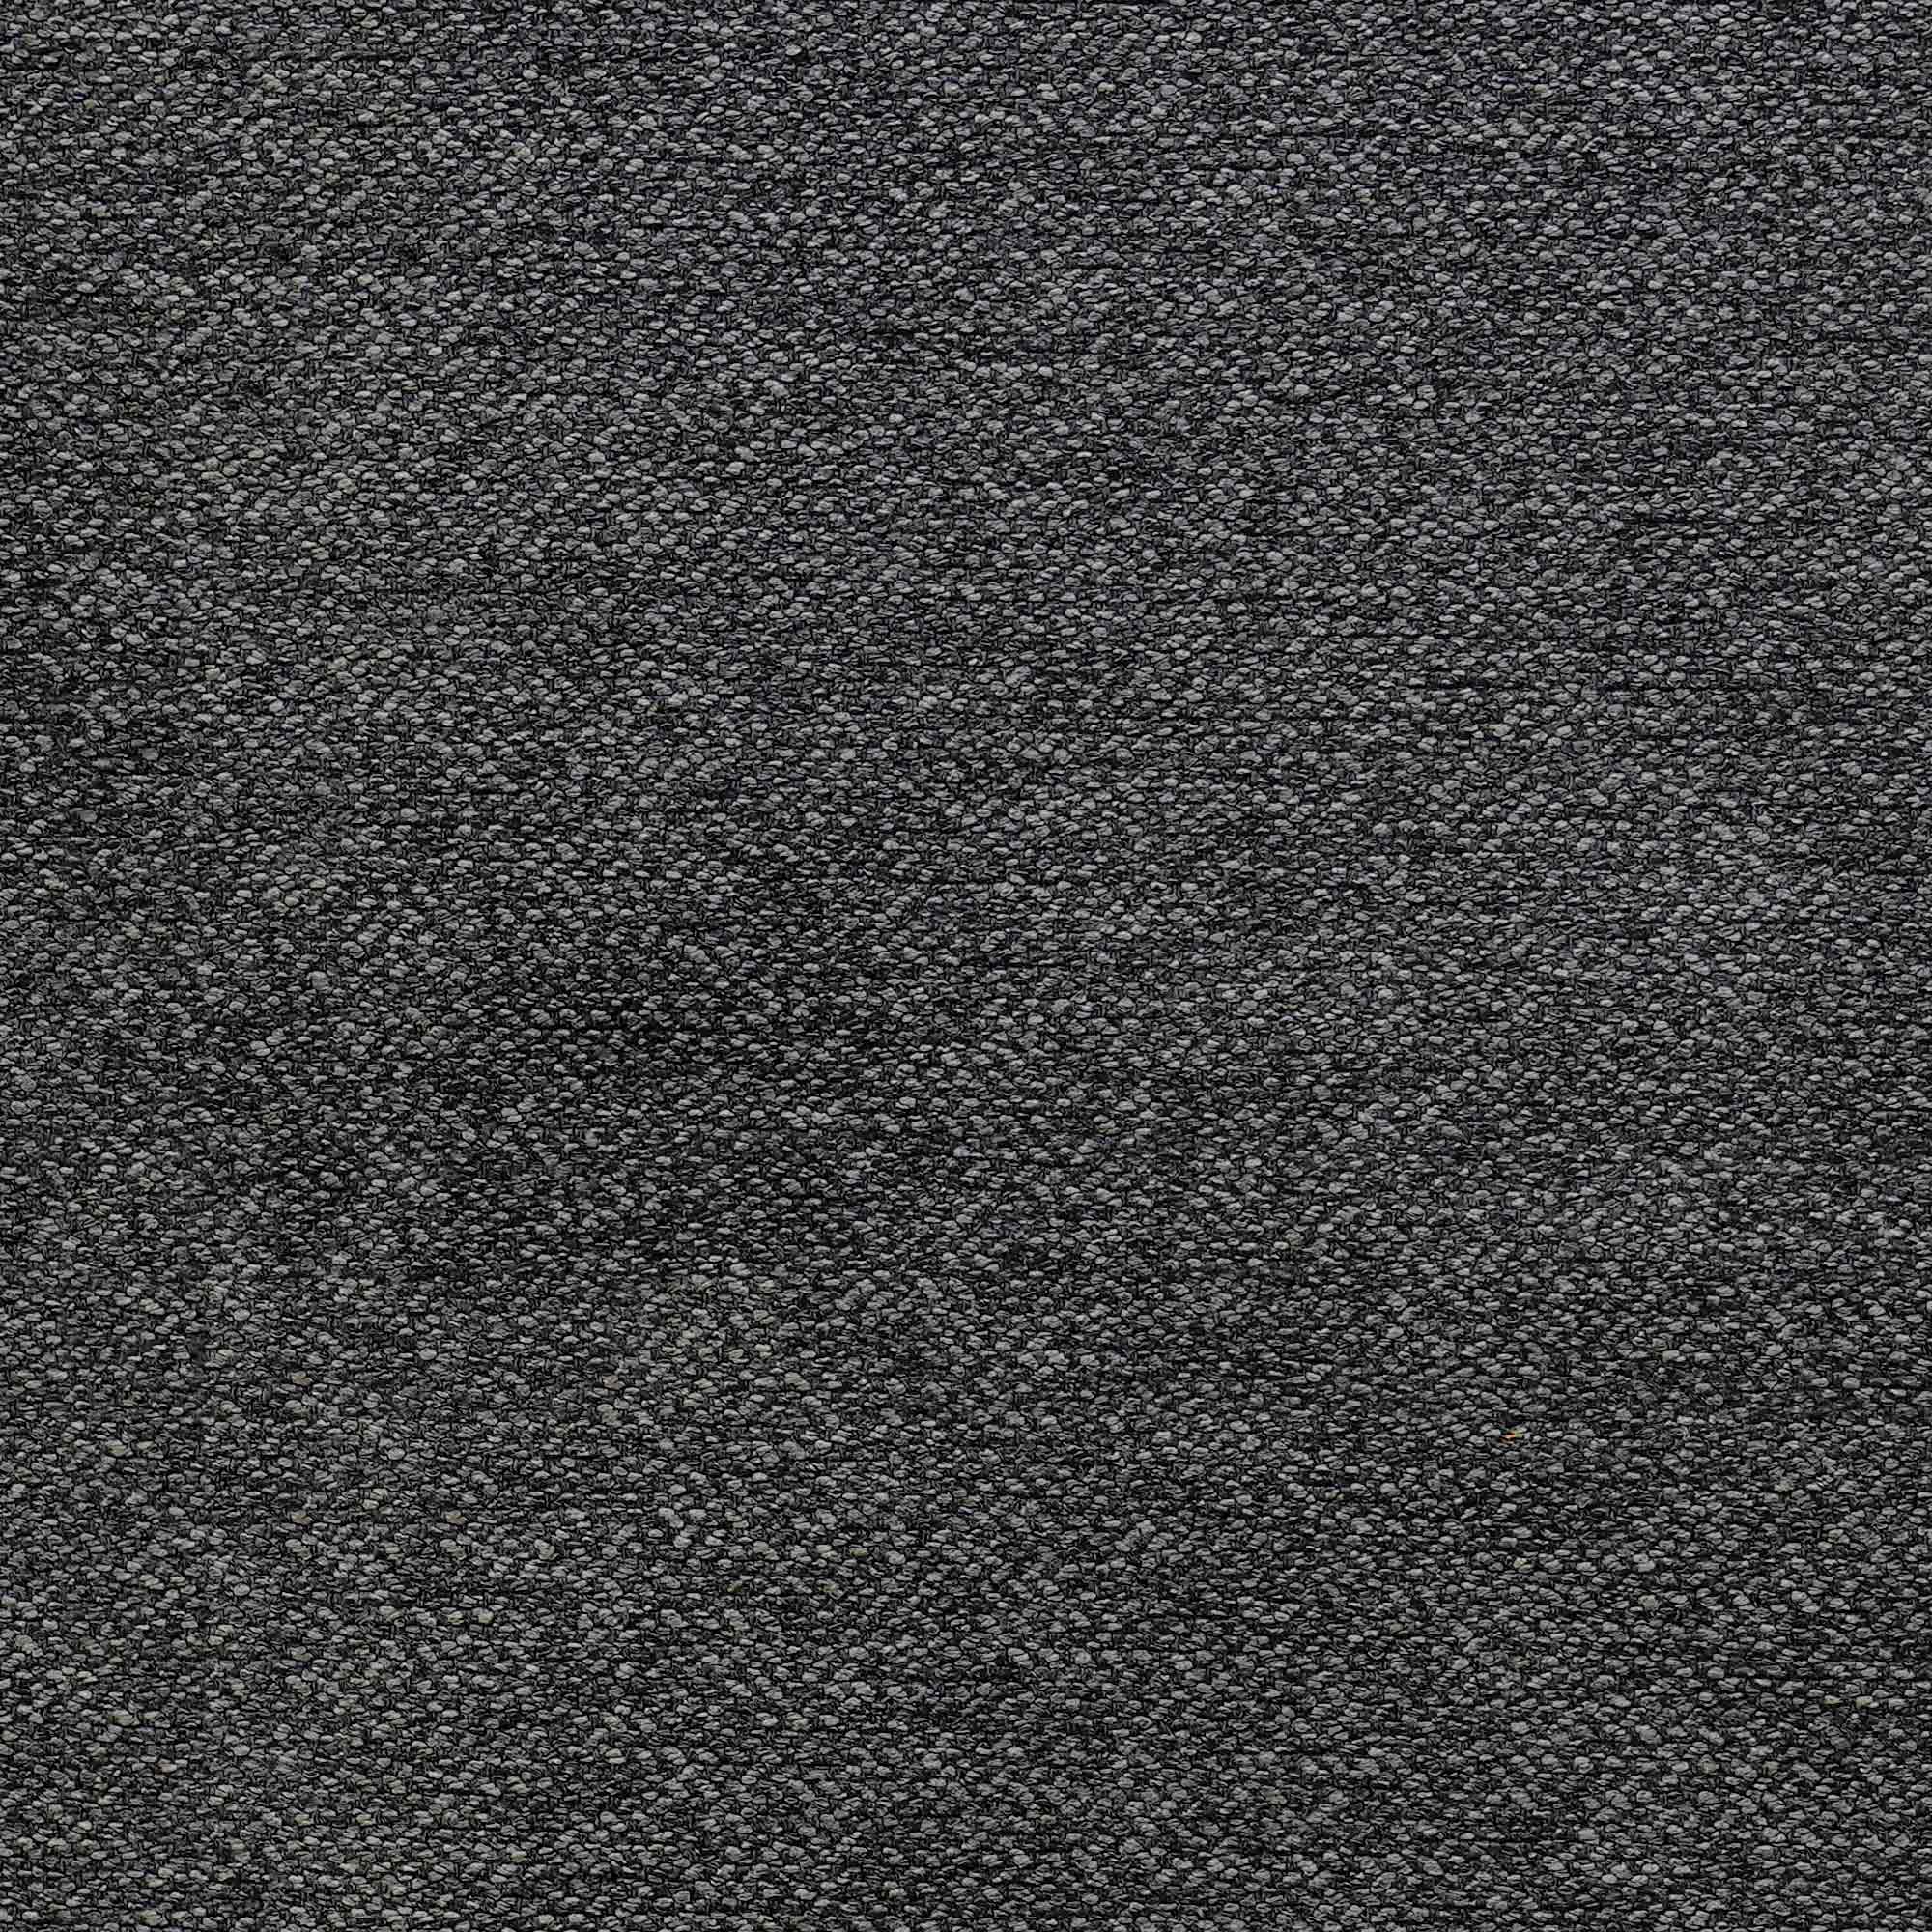 Charcoal Grey Swatch